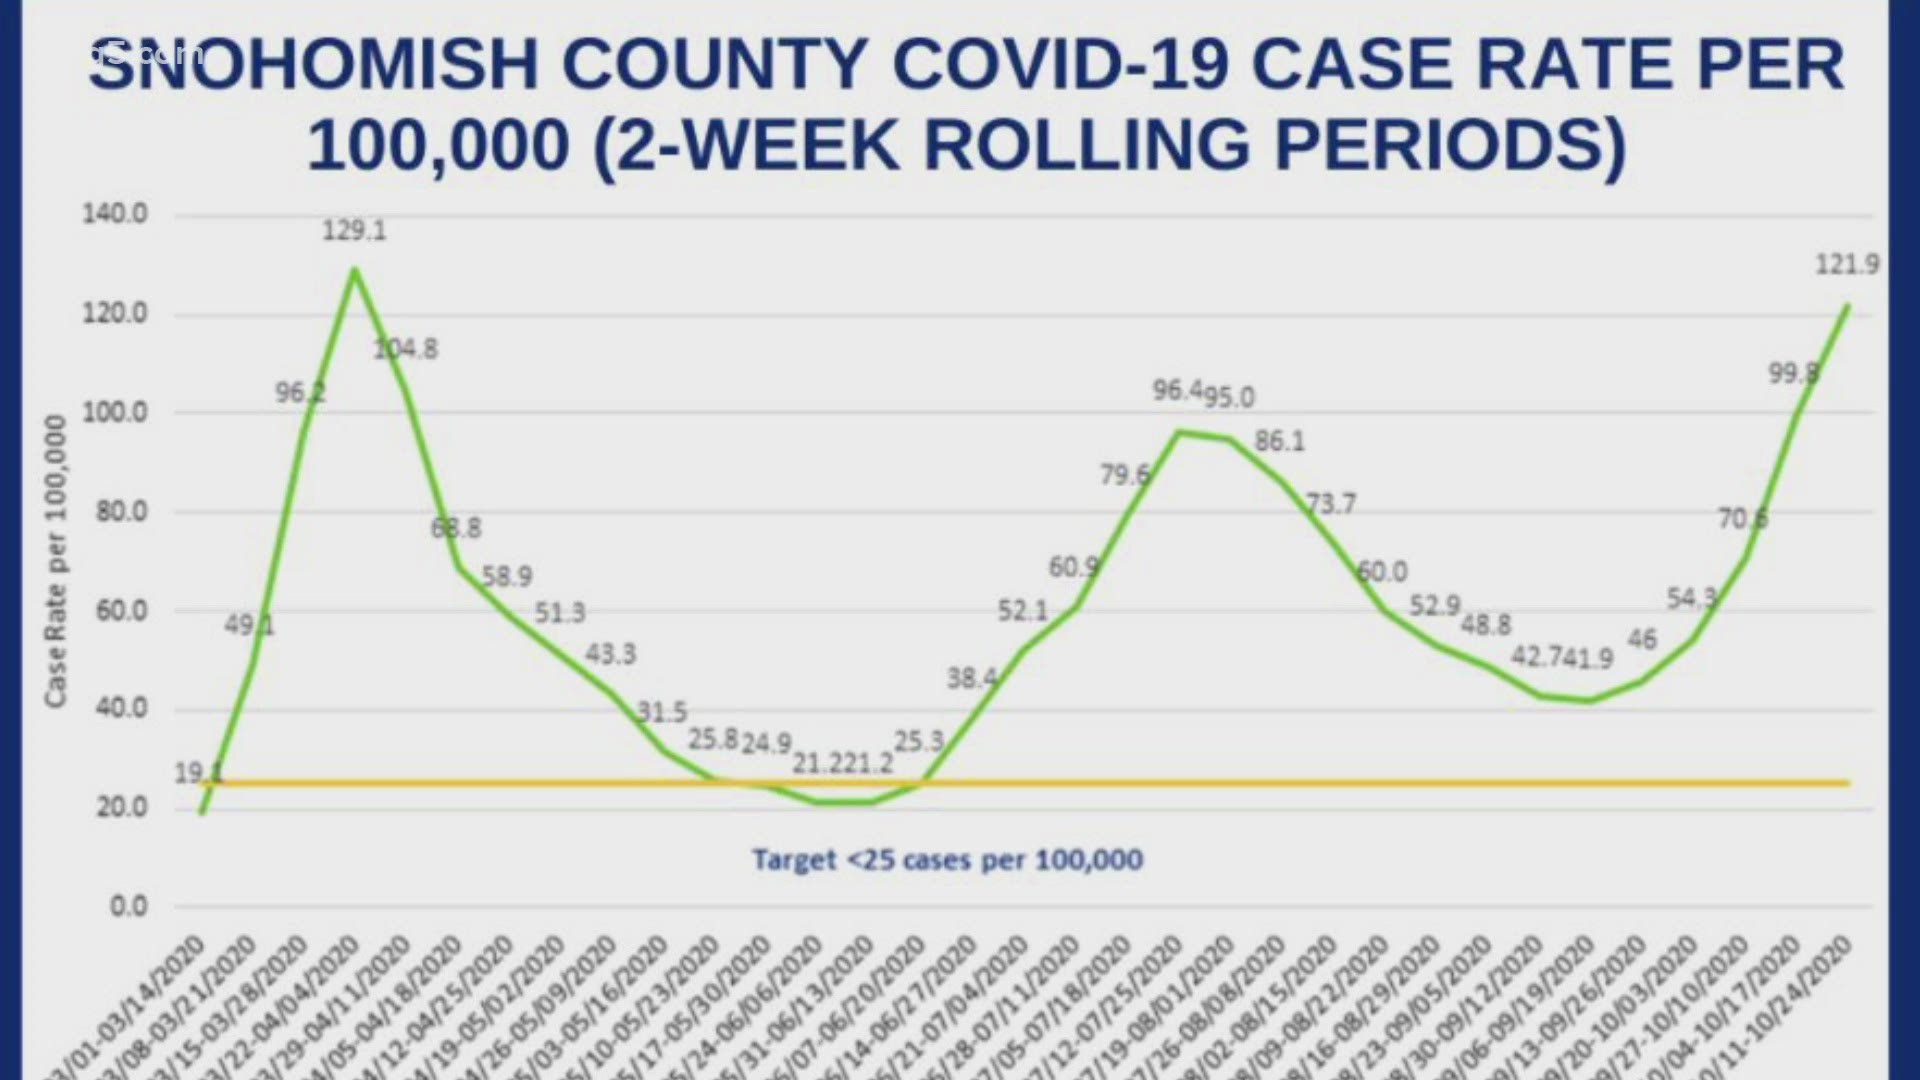 Snohomish County is reporting close to its highest recorded peak of coronavirus cases.